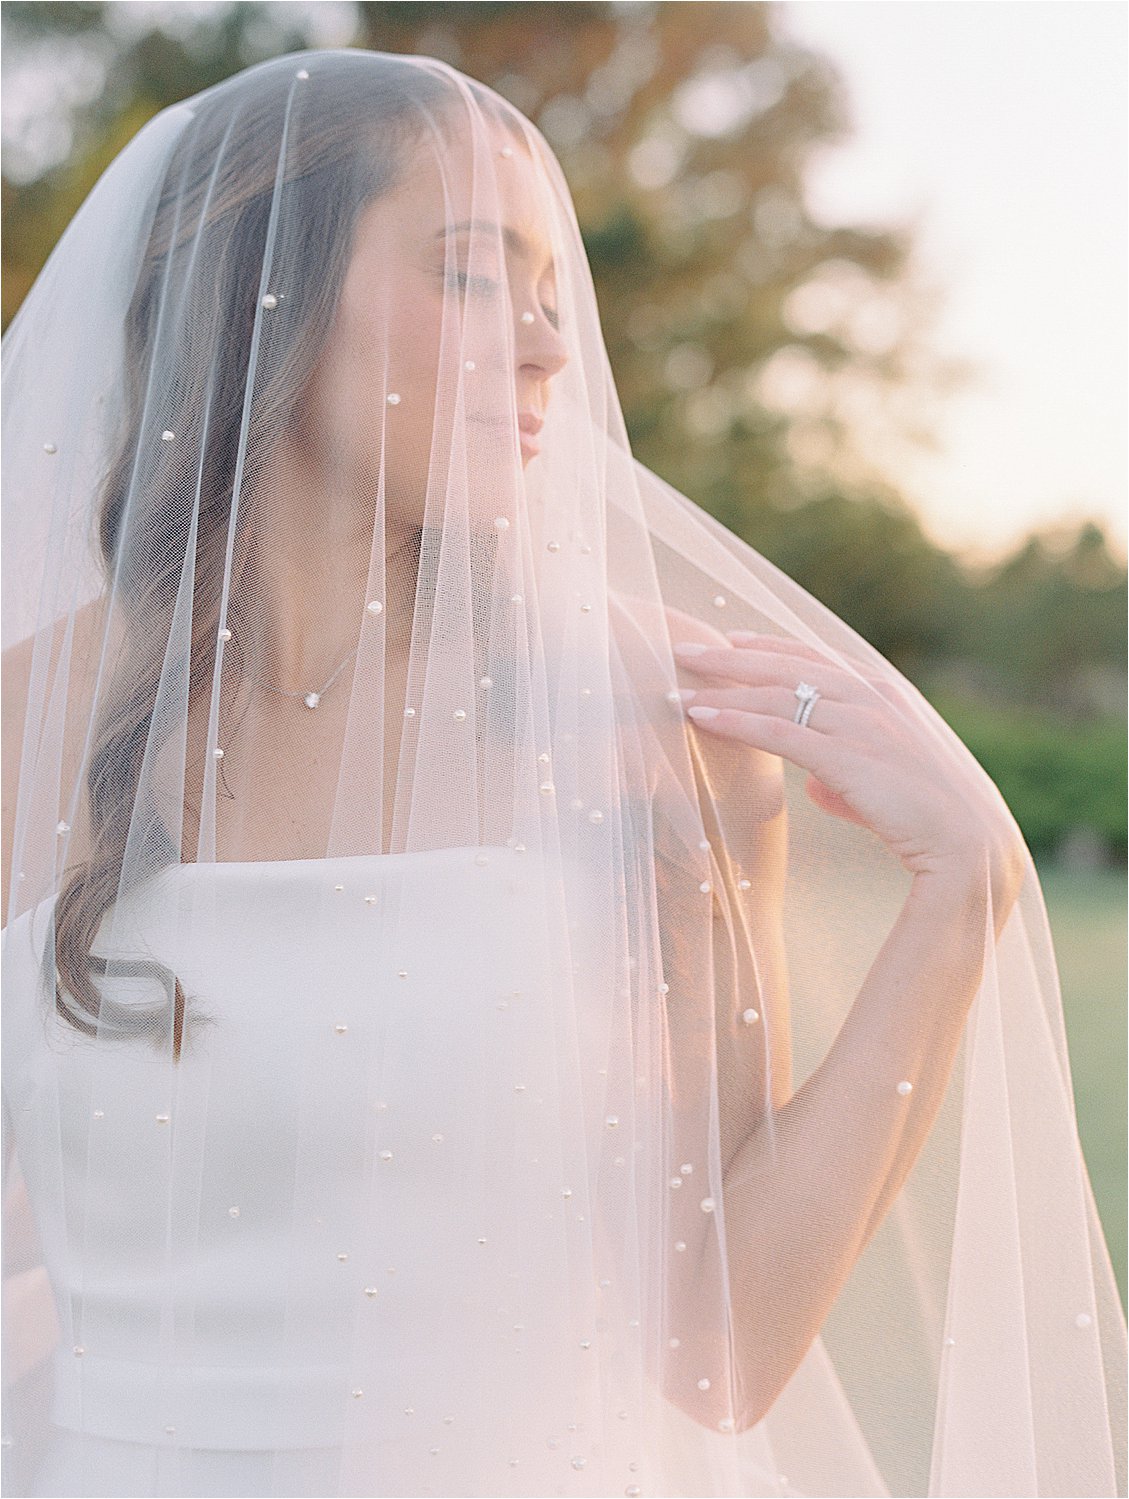 Bride in pearl veil at Golden Hour Portraits at Fenwick Island, Delaware Wedding with Destination Wedding Photographer, Renee Hollingshead